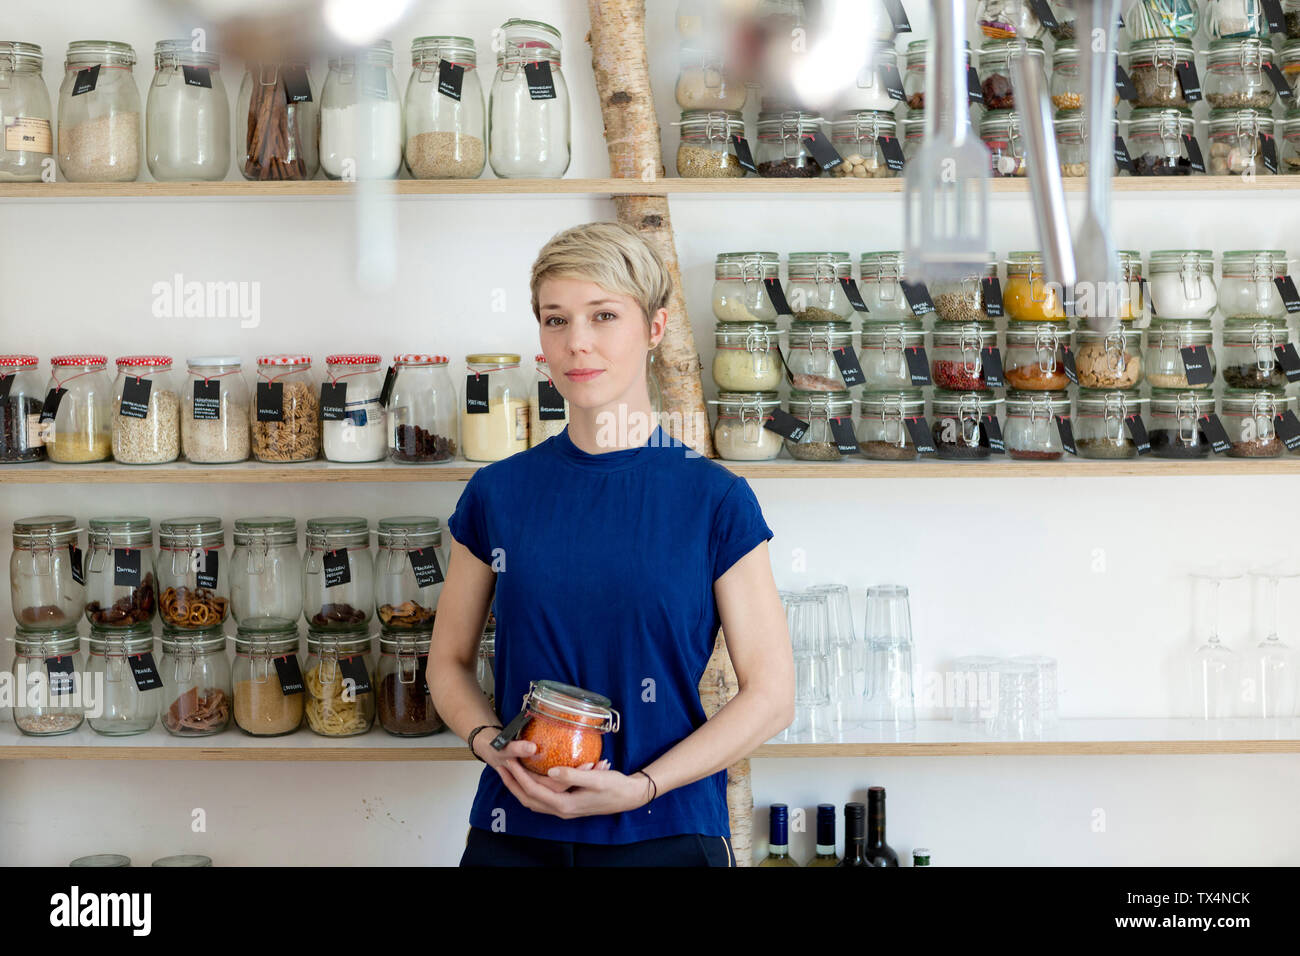 Portrait of woman holding jar in front of spice shelf in kitchen Stock Photo